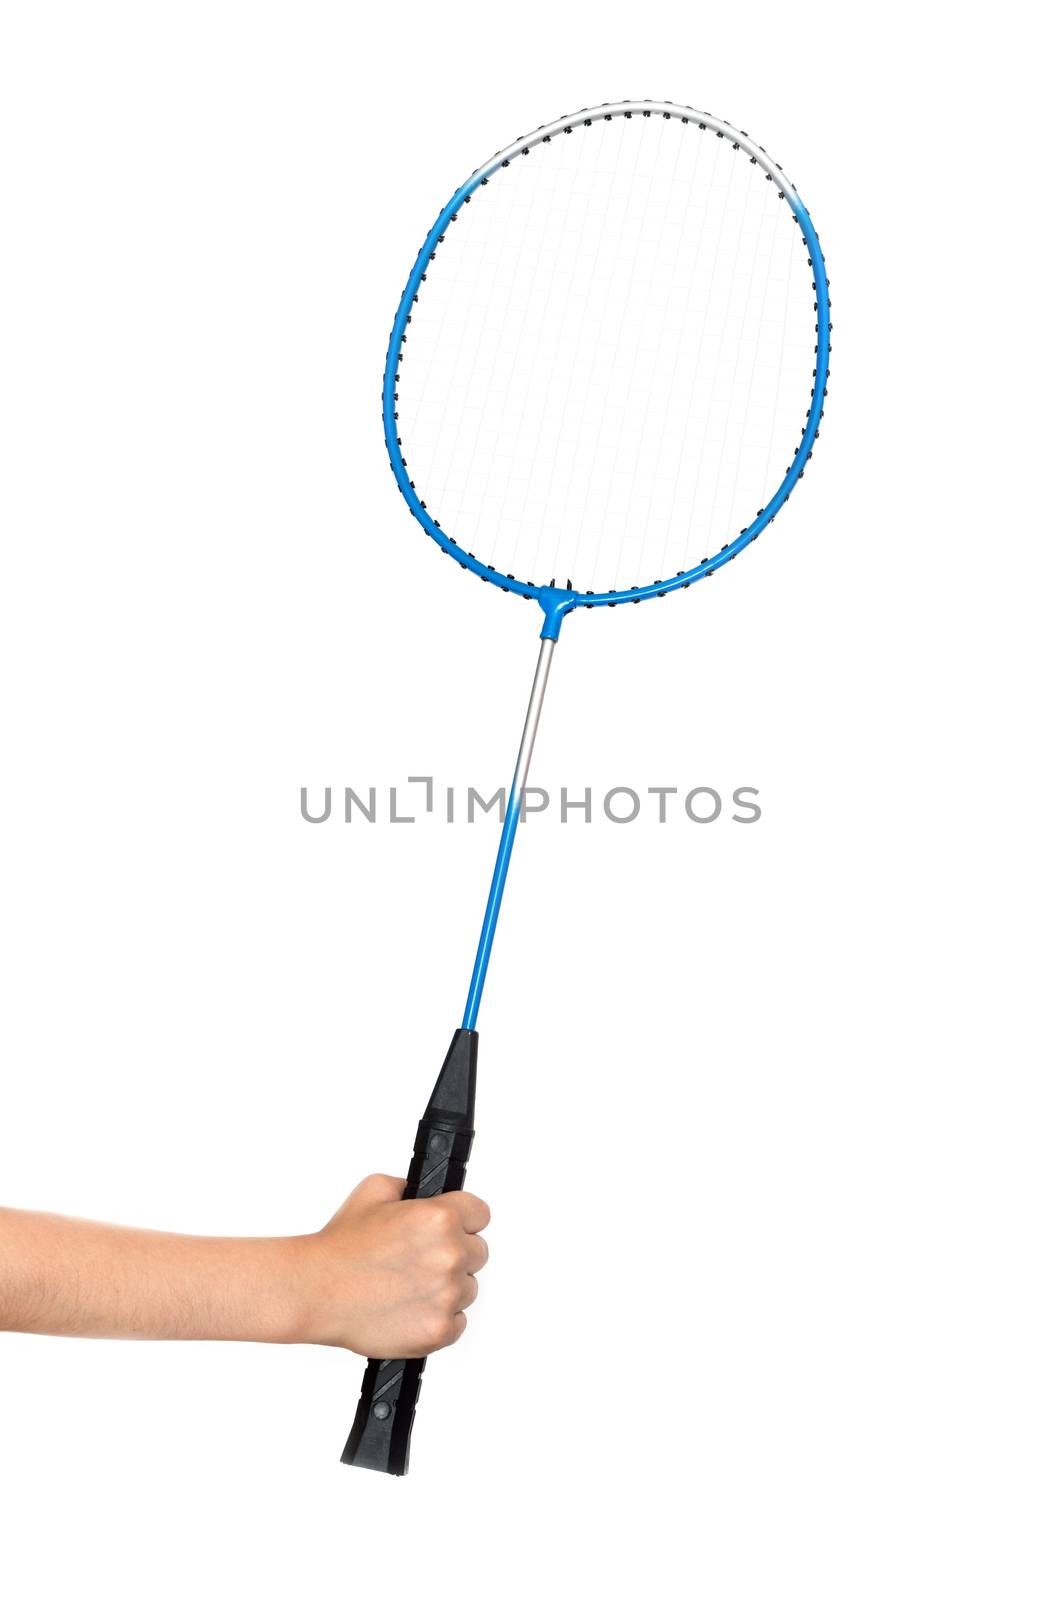 child's hand holding a badminton racket on a white by DNKSTUDIO